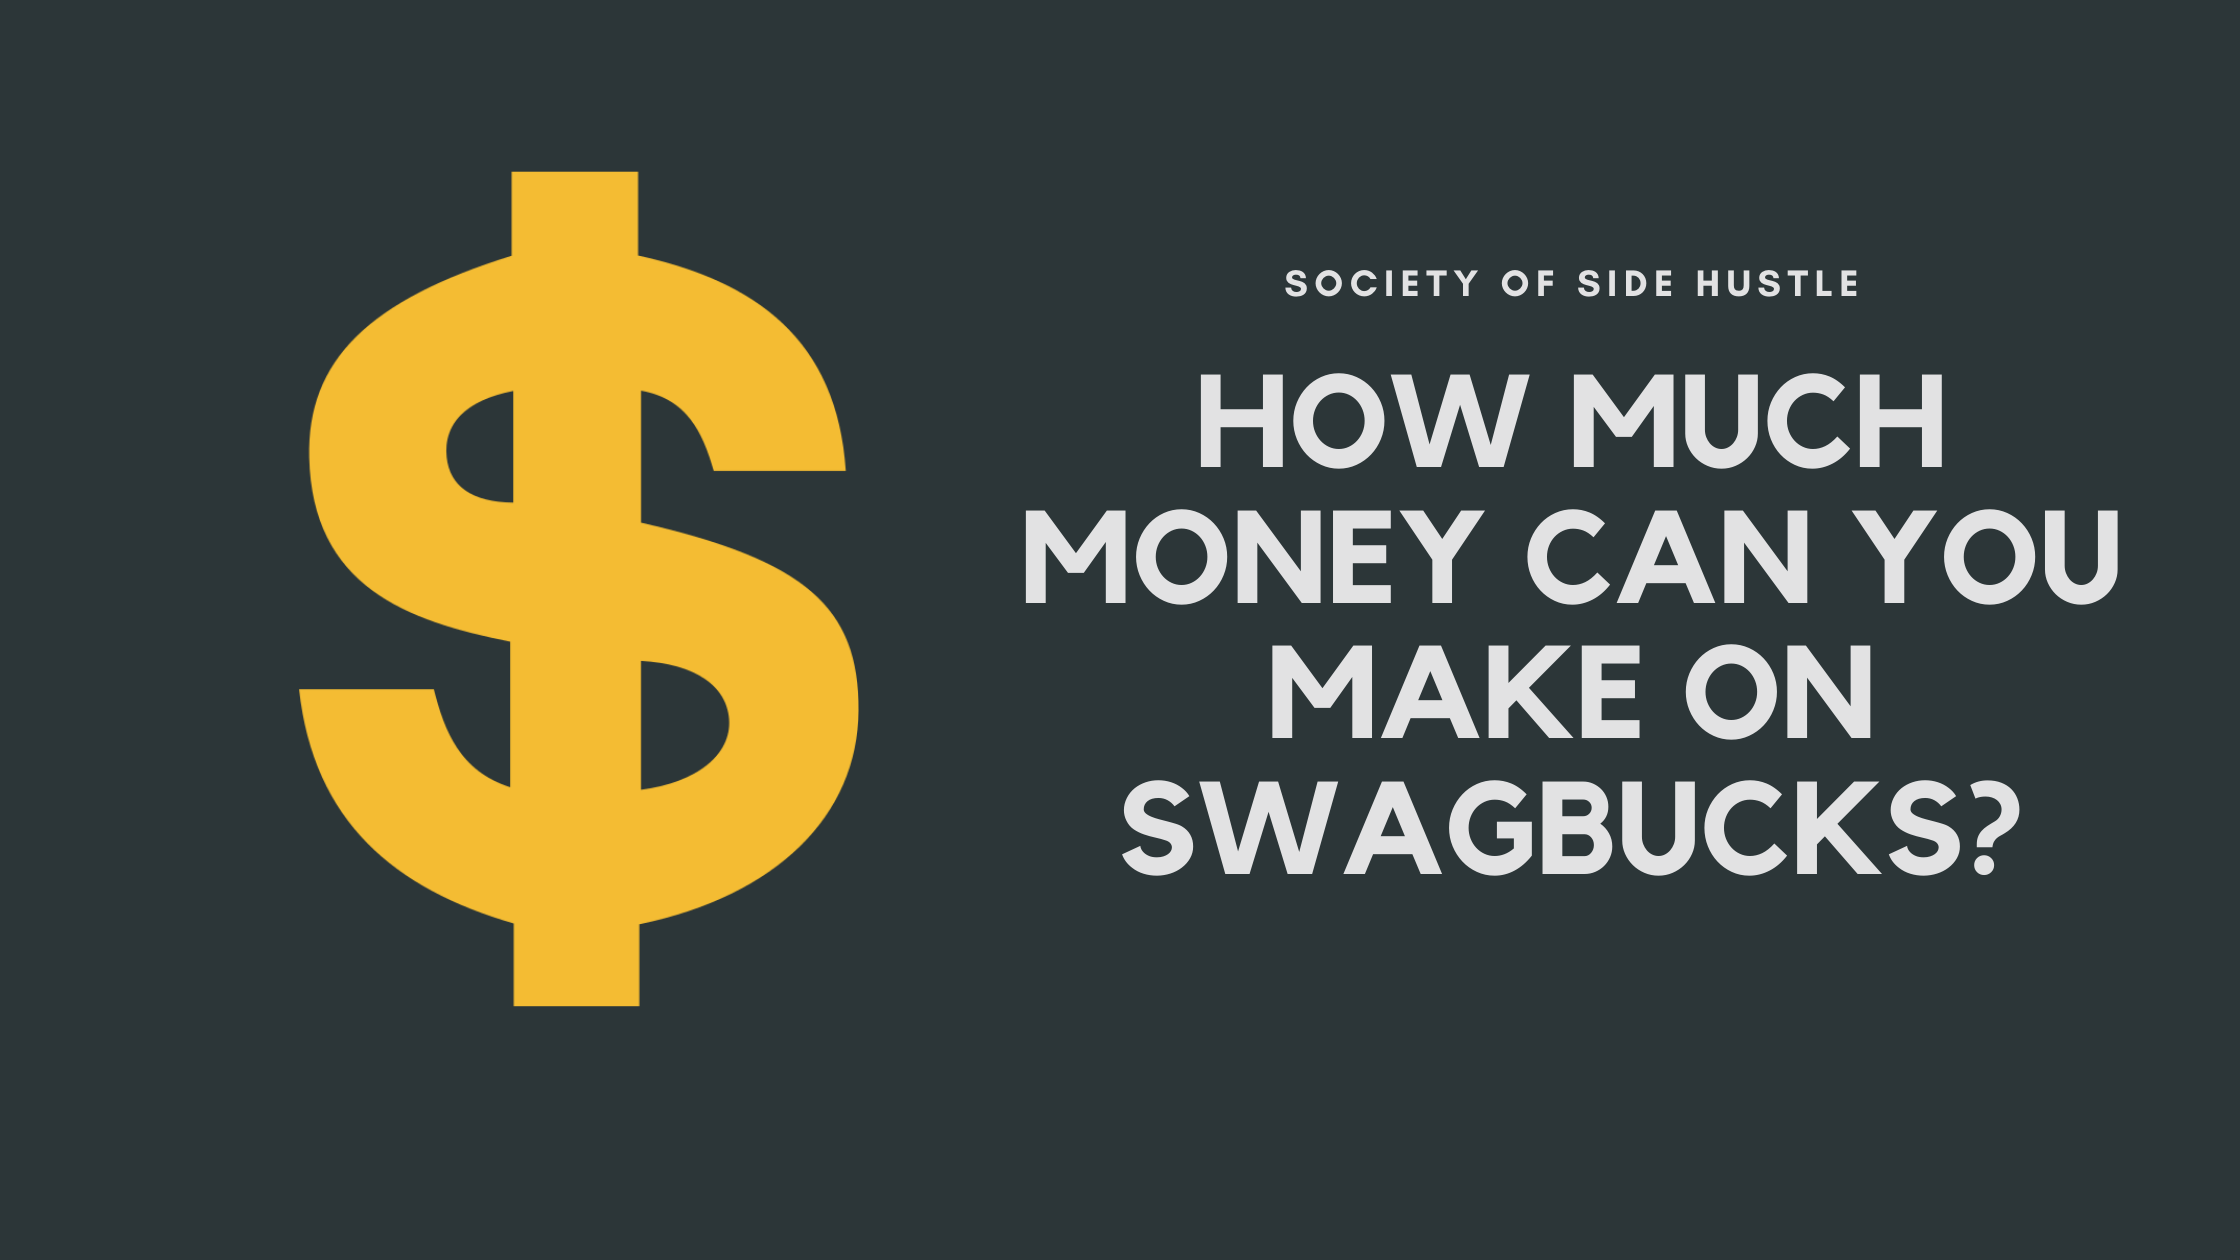 How Much Money Can You Make from Swagbucks a Month?